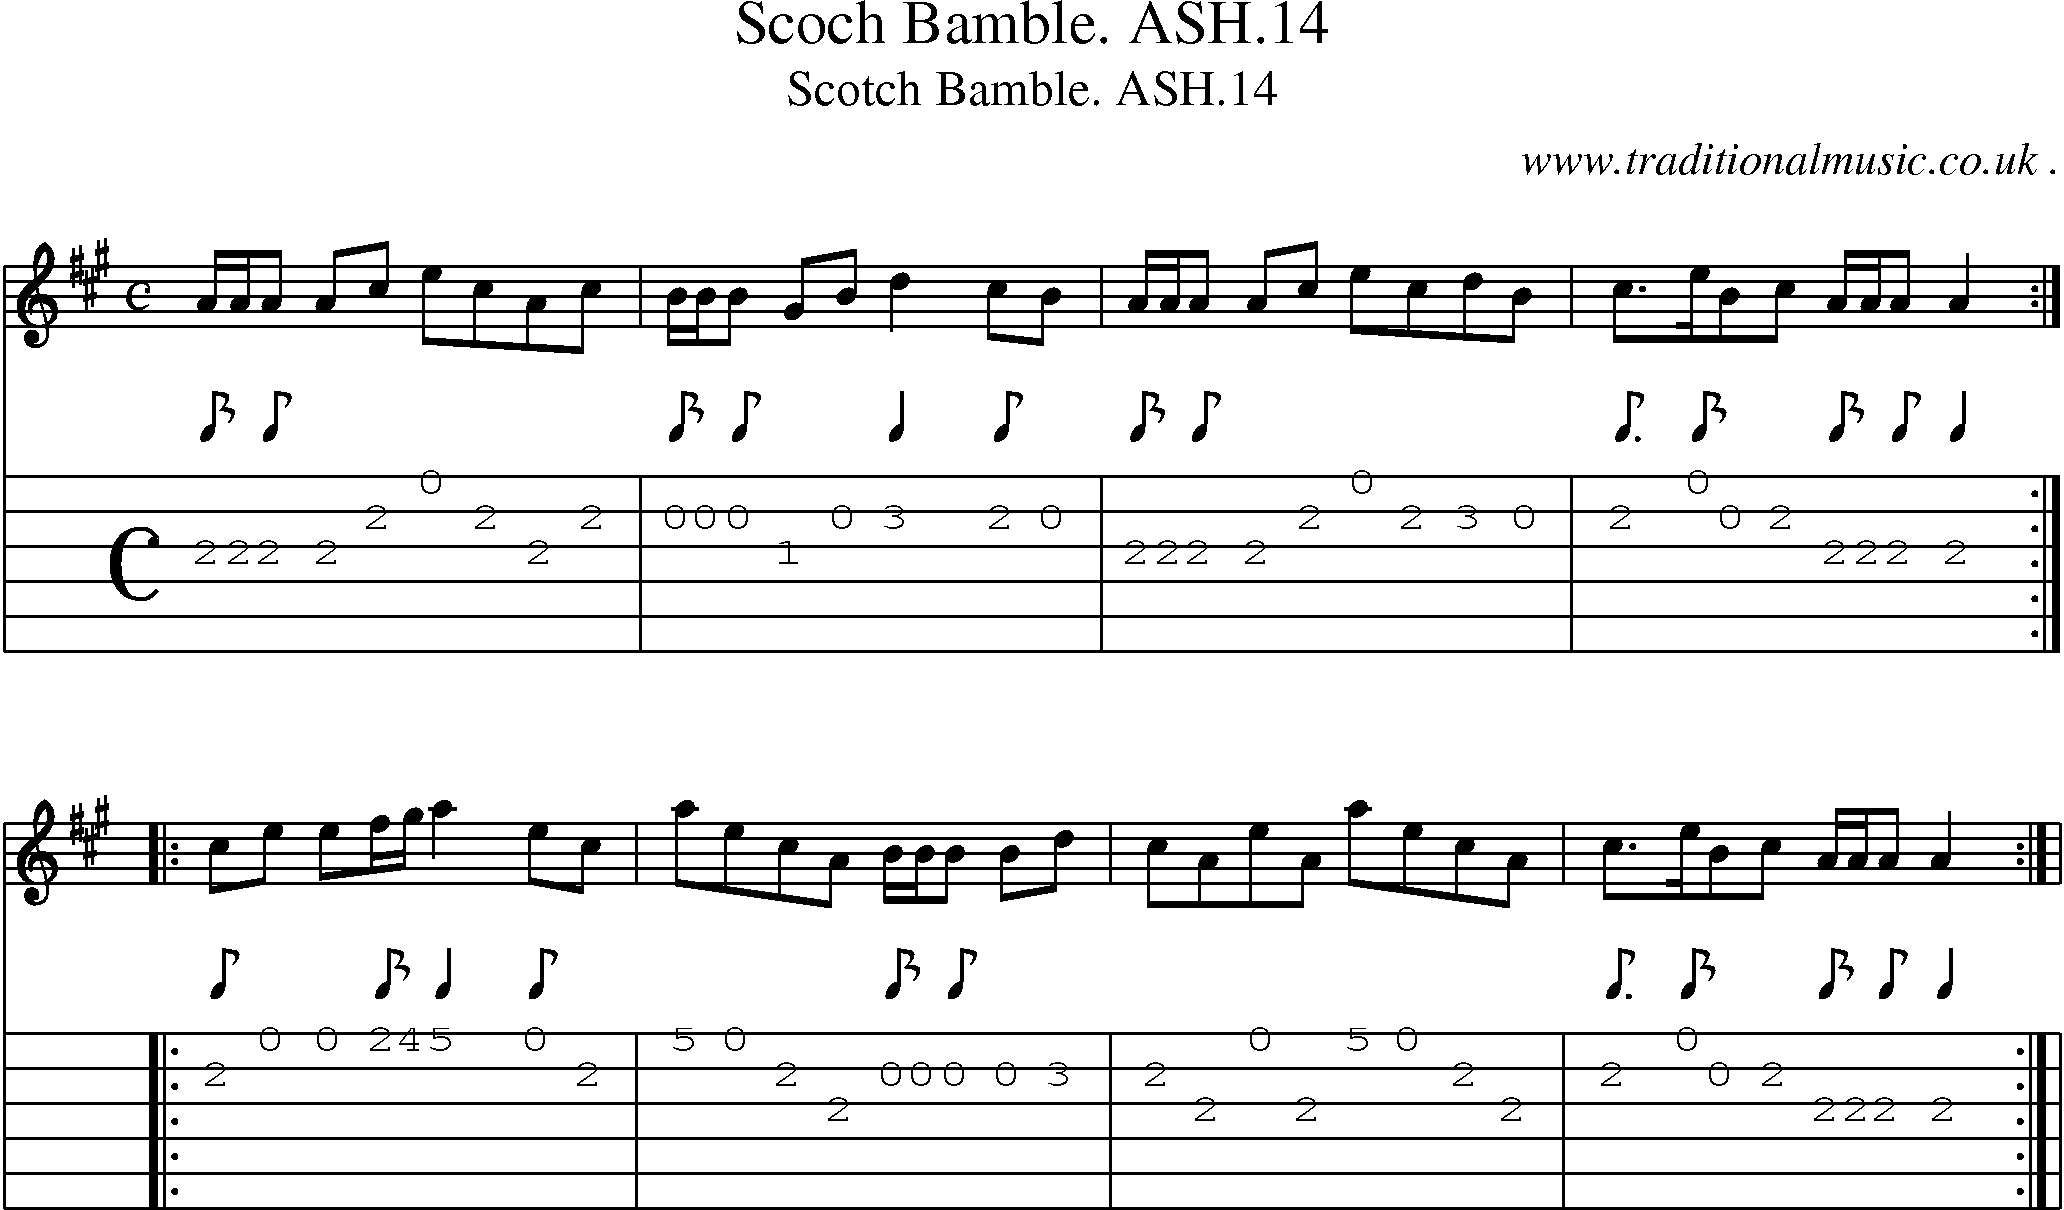 Sheet-Music and Guitar Tabs for Scoch Bamble Ash14